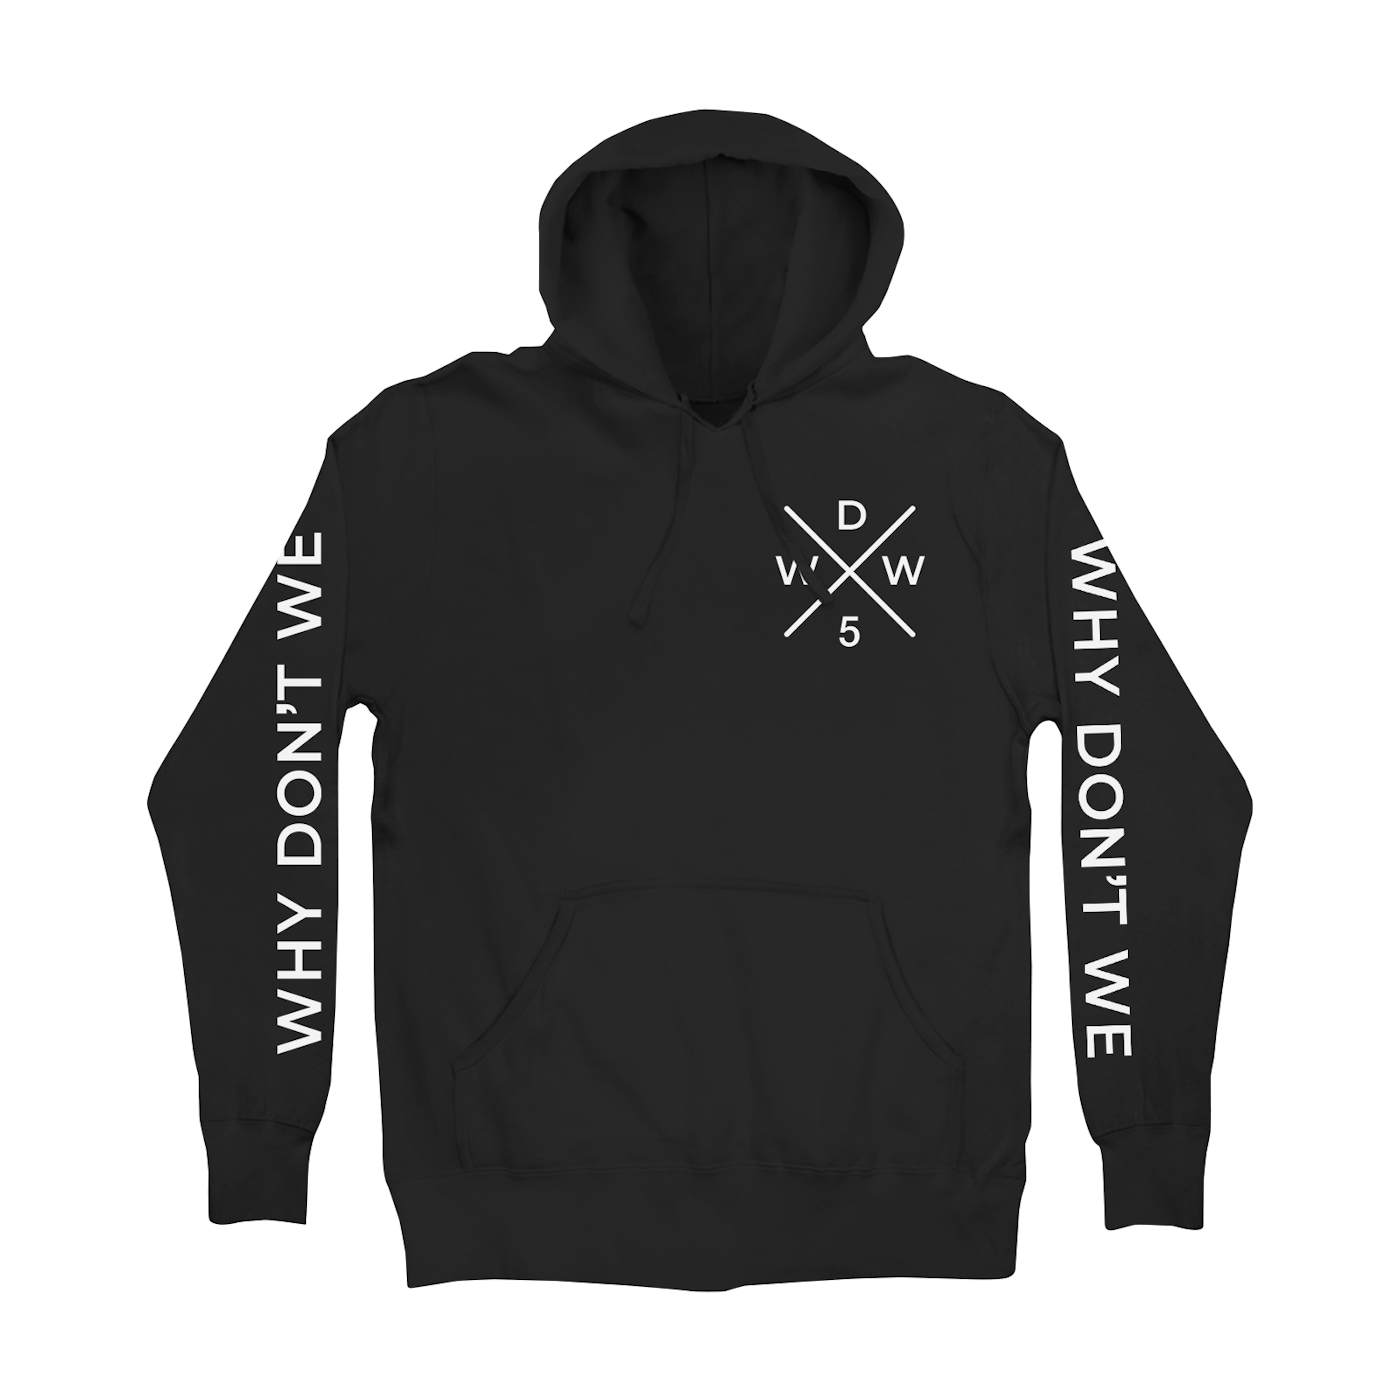 Why Don't We Hoodie | WDW5 Criss Cross Logo Why Don’t We Hoodie